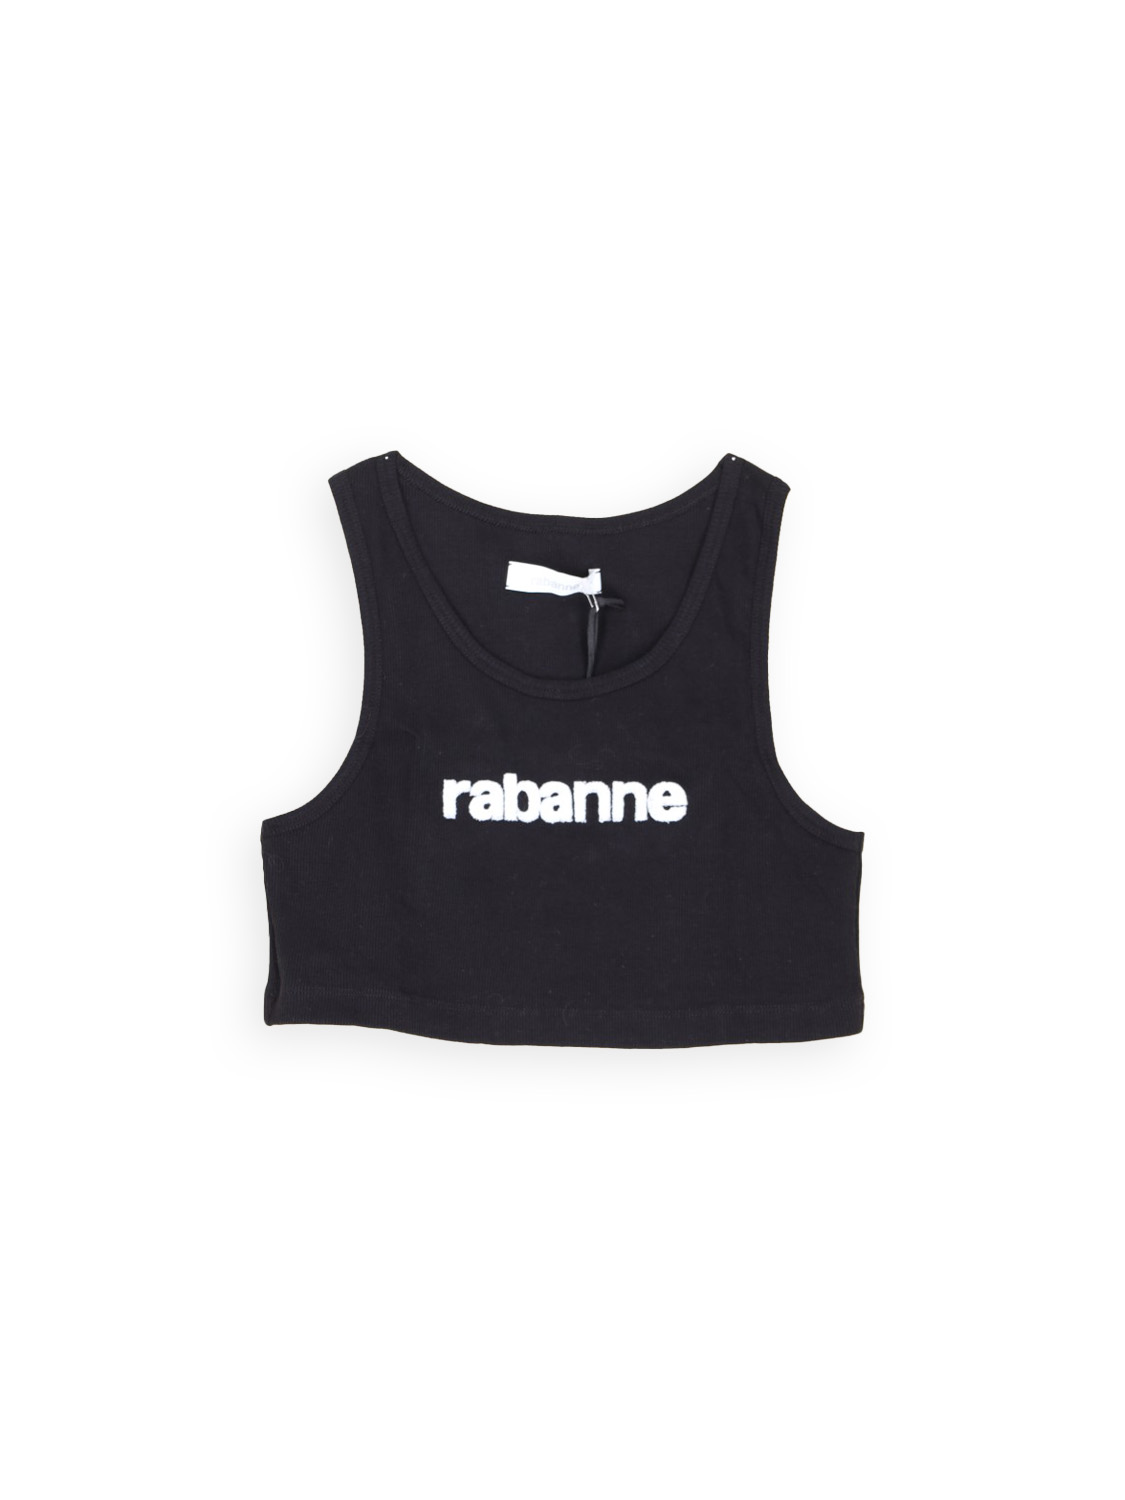 Cropped Tanktop with lableprint 